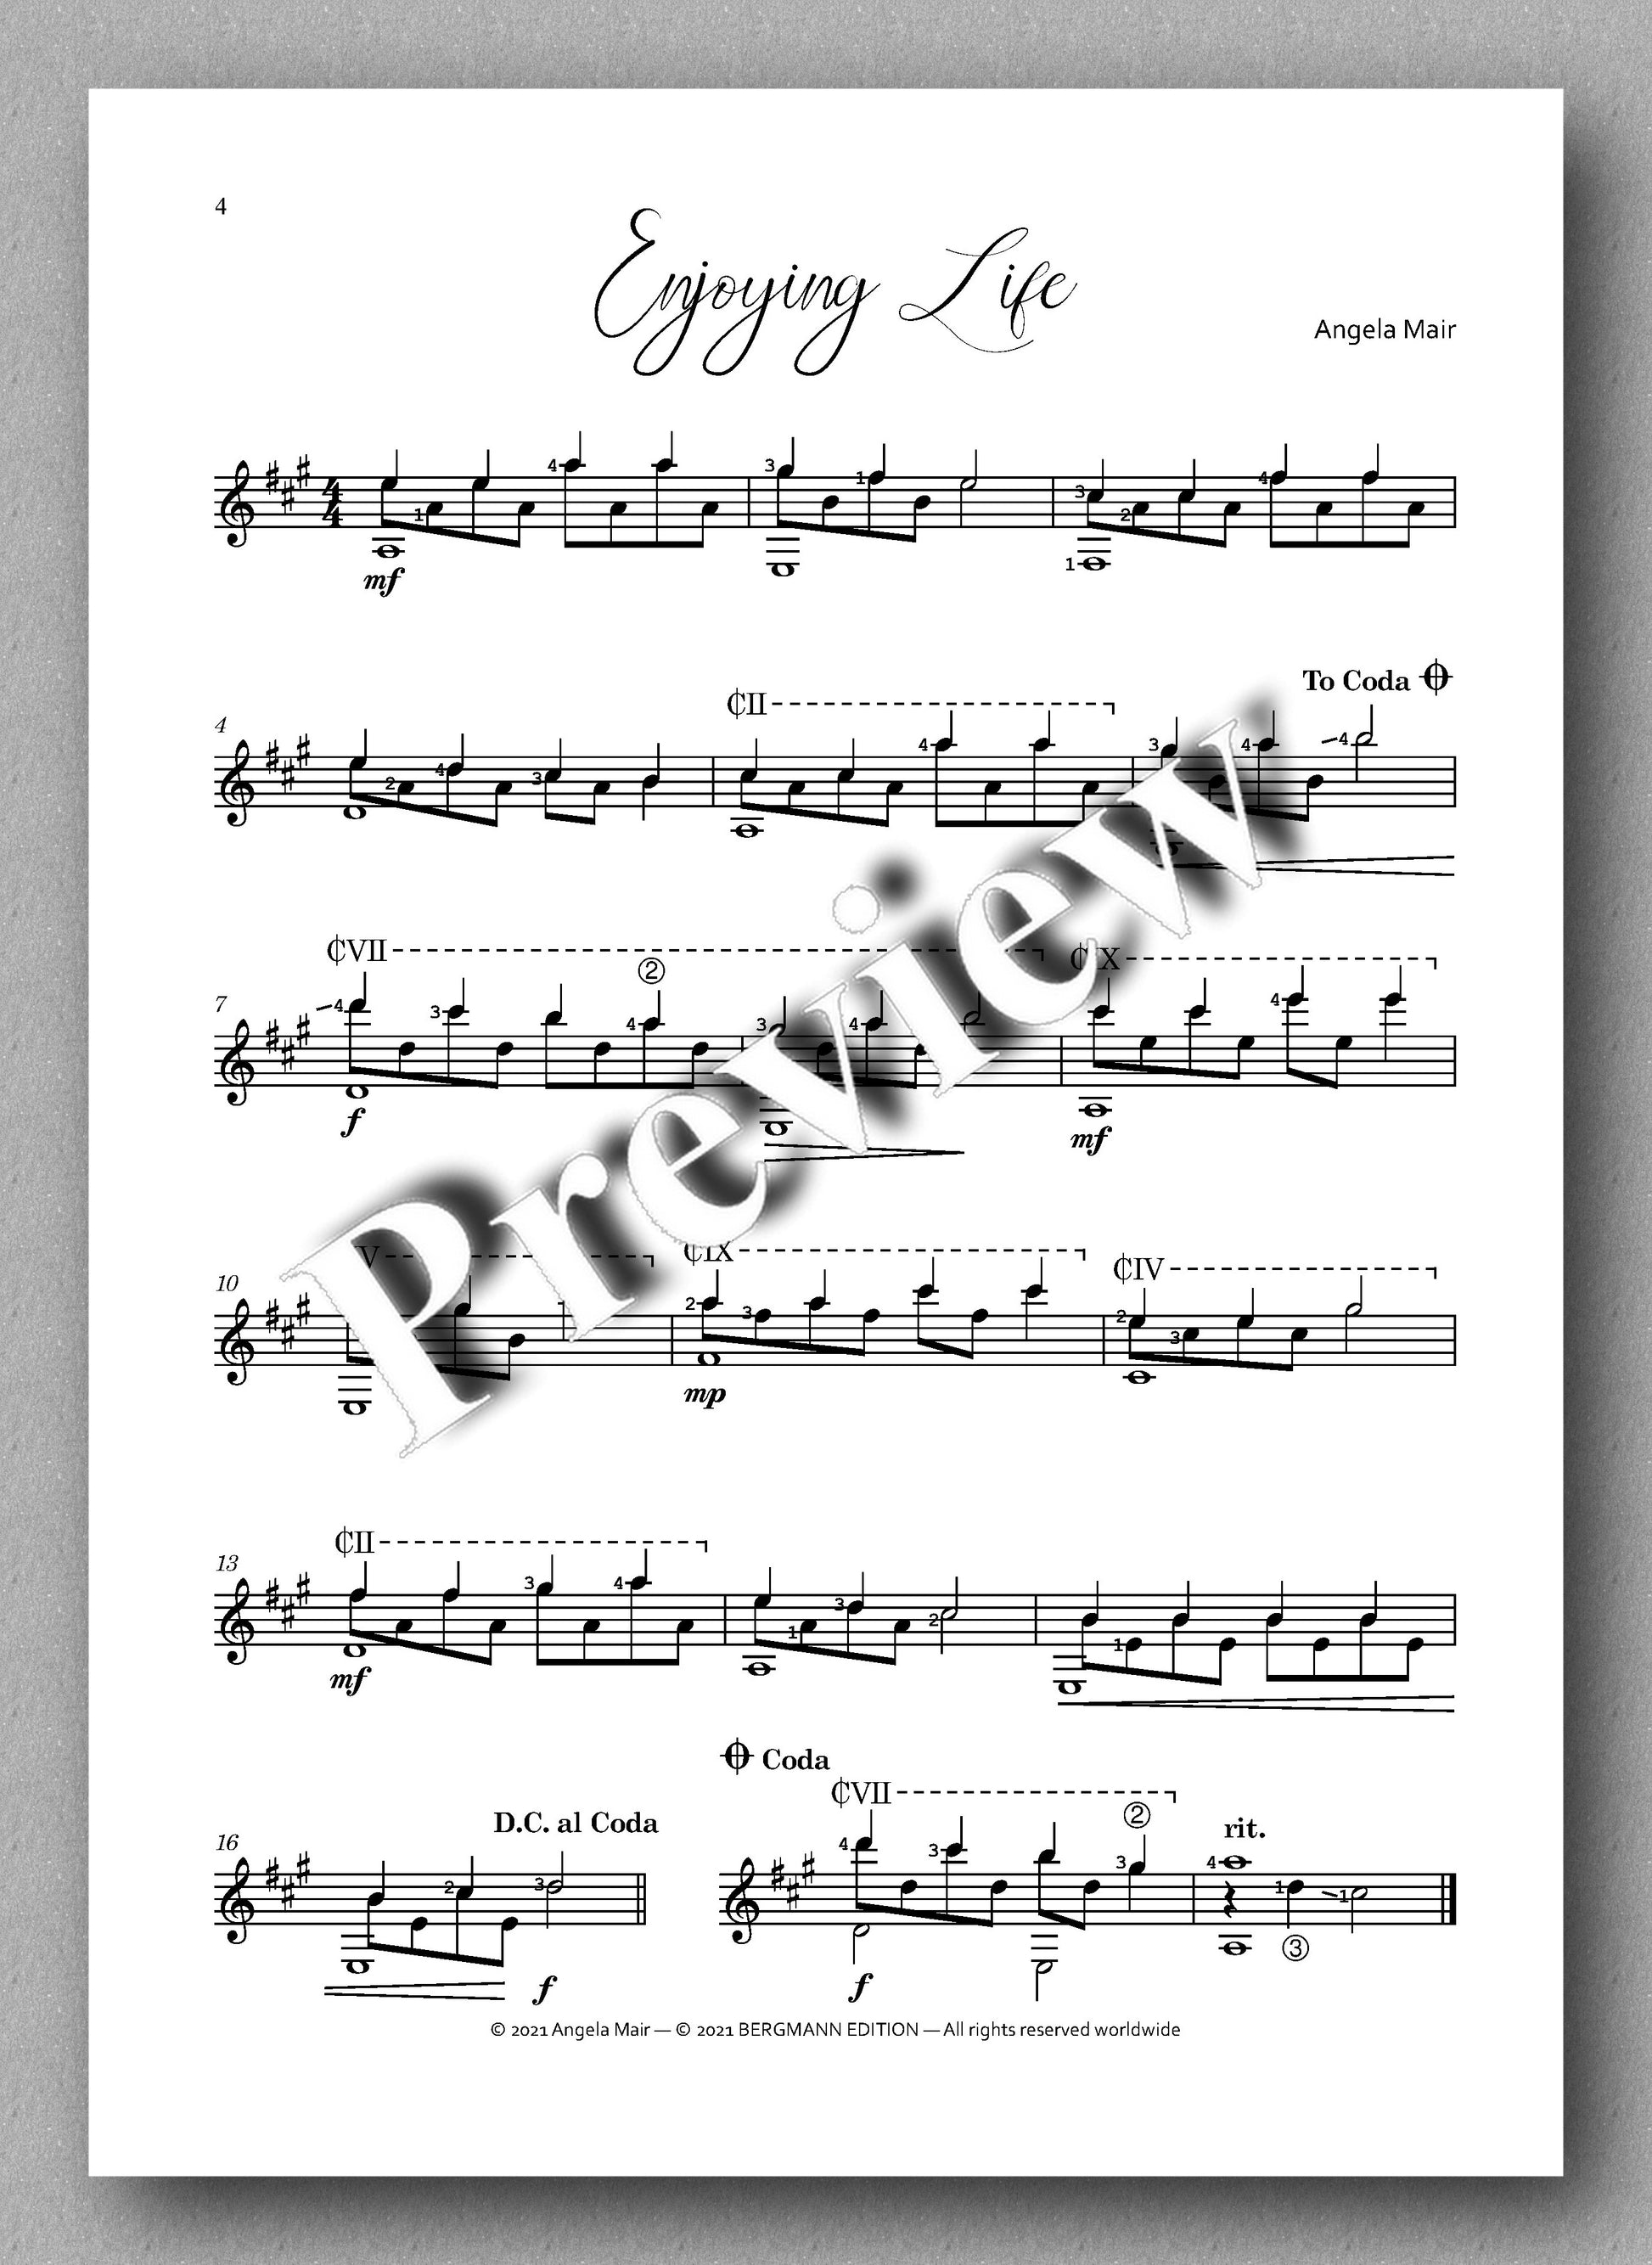 Mair, One by One - vol. 3 - Music score 1